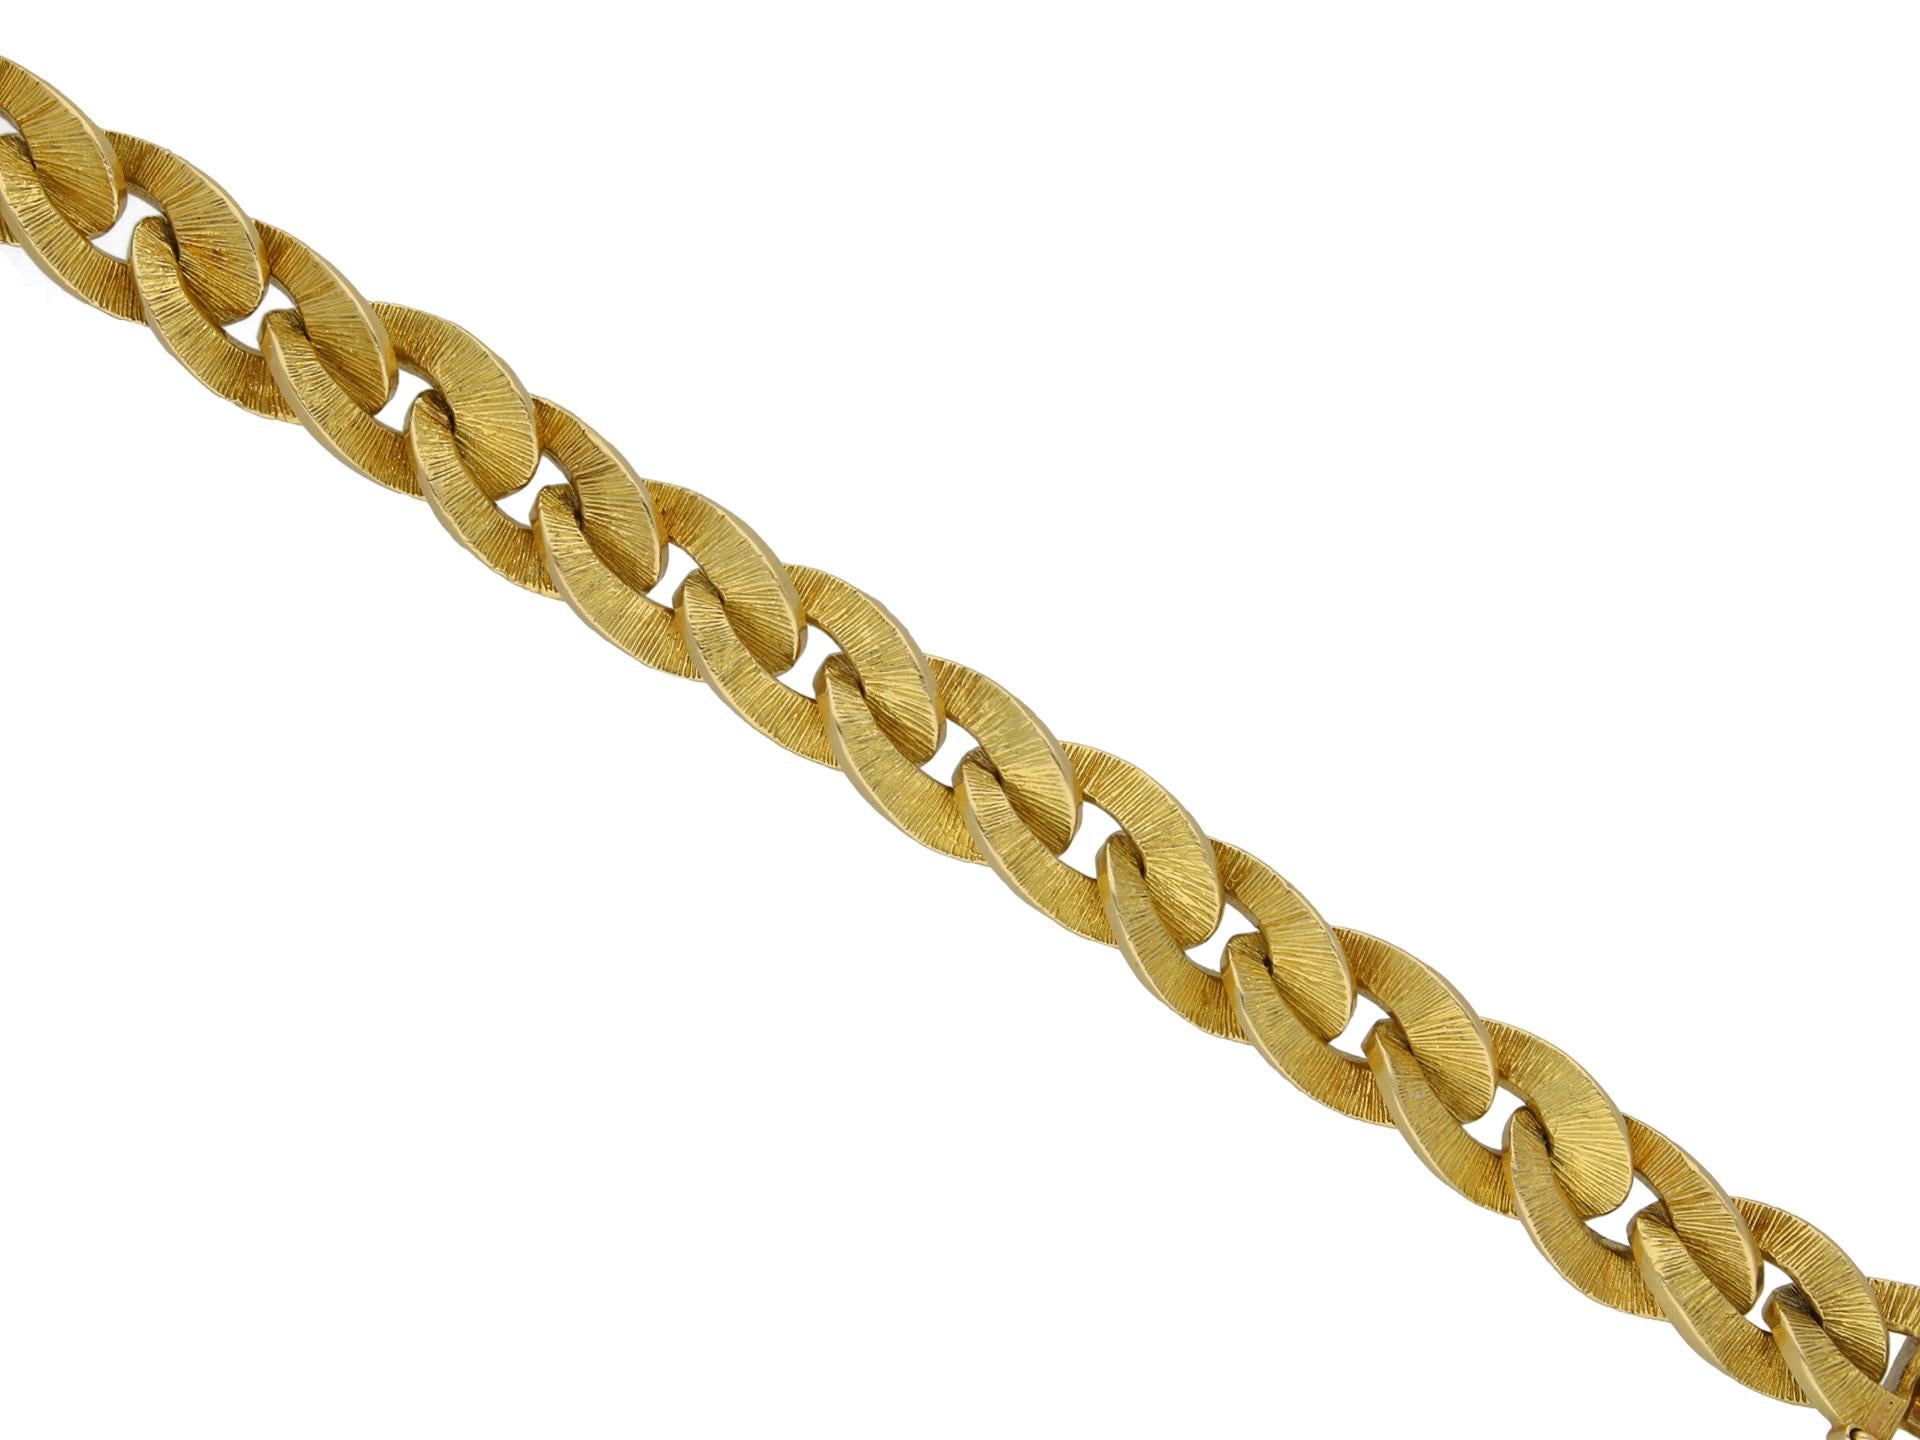 Hermes gold textured bracelet. A yellow gold articulated bracelet comprised of a flat oval curb link chain with linear textured detailing, polished edges and fitted with a secure integrated push clasp with safety catch, approximately 8